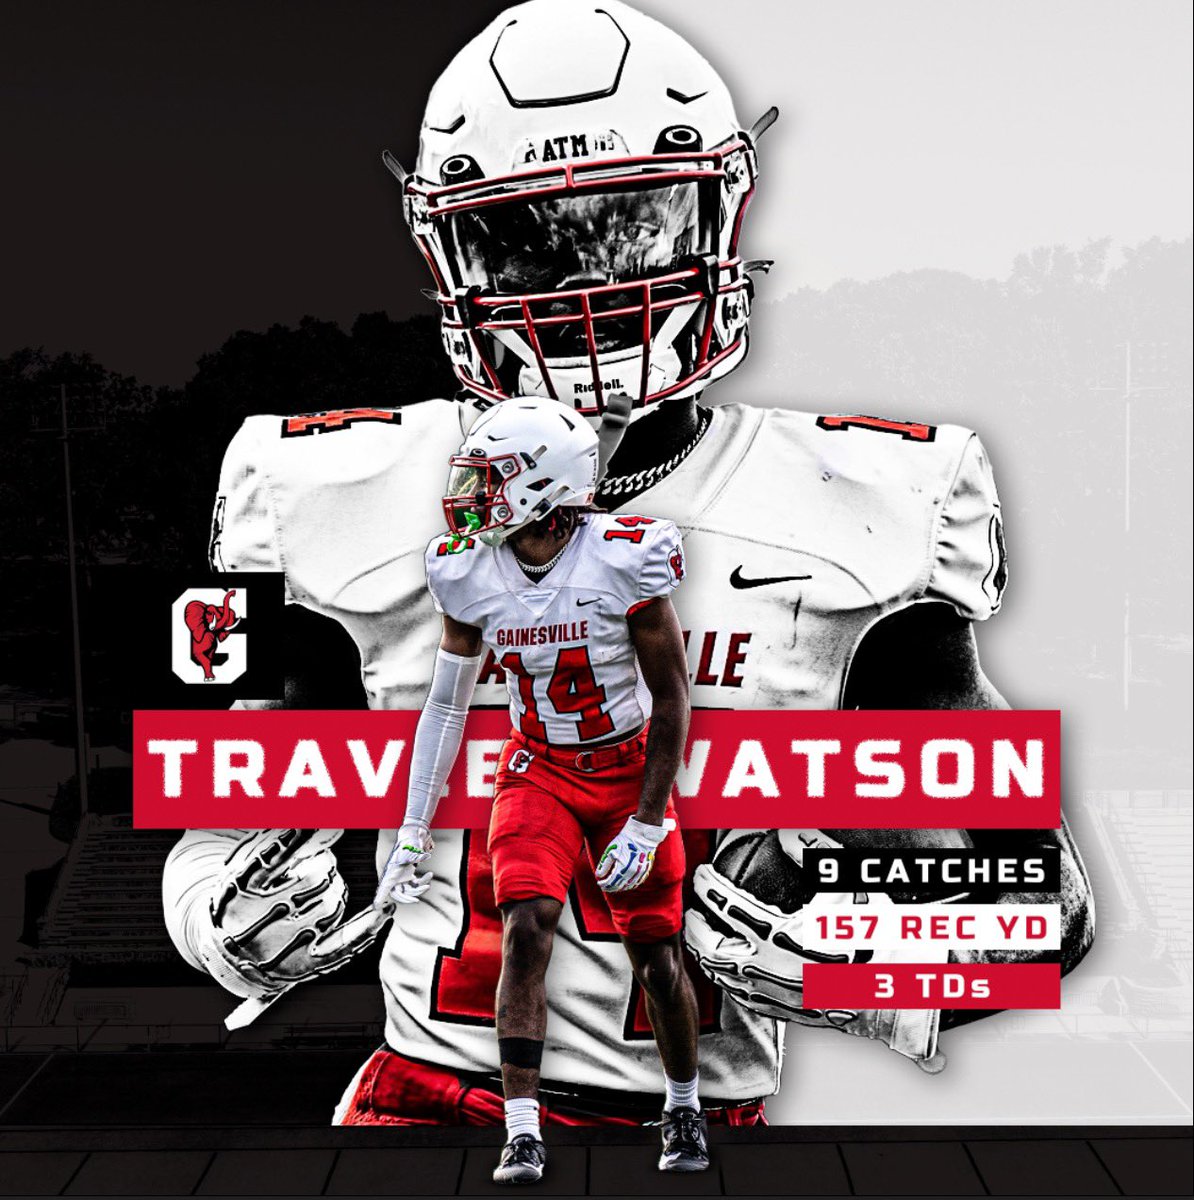 @_TravienWatson_  has been on 🔥 this week picking up 2 D1 offers + put up BIG numbers in the spring game last night ⬇️ #RecruitTheG

#Chas1ngBest    |    #NoOpt1ons